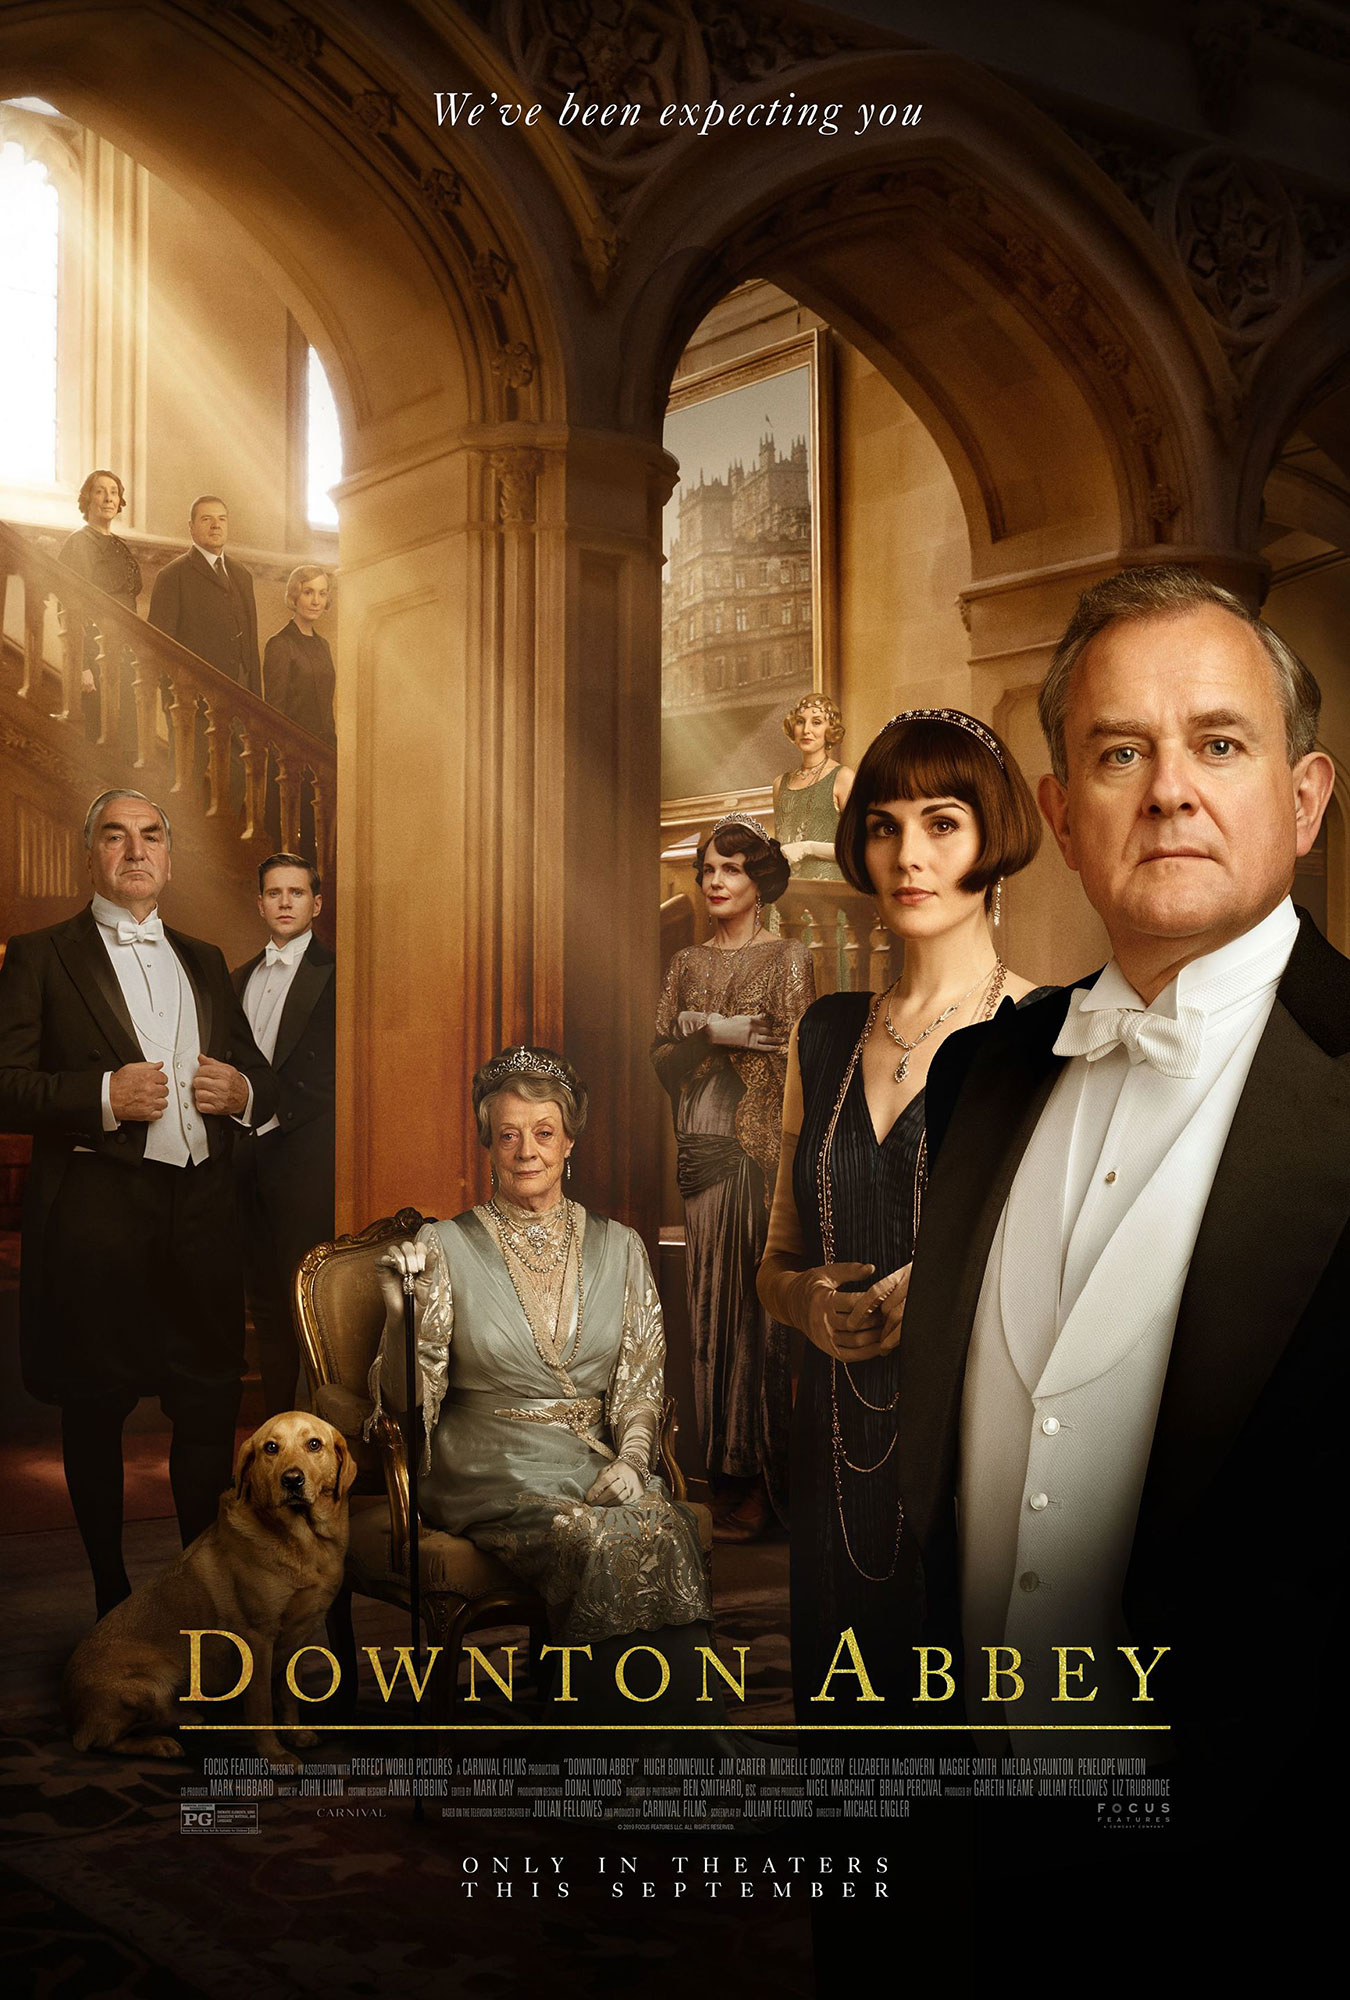 Downton Abbey: A New Era' Movie: What to Know About the Sequel